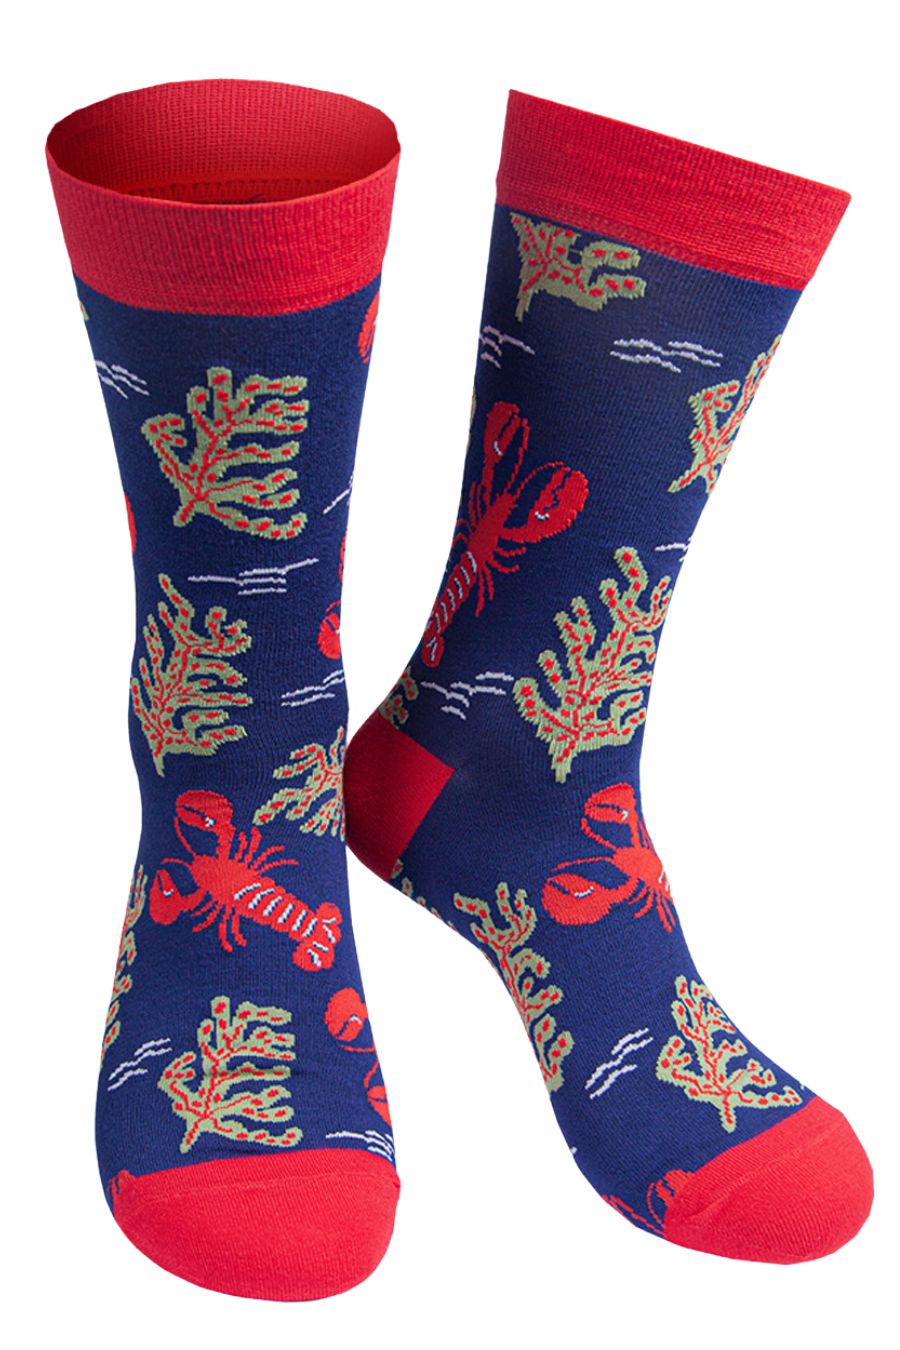 navy blue and red socks with a pattern of lobsters and ocean plant life